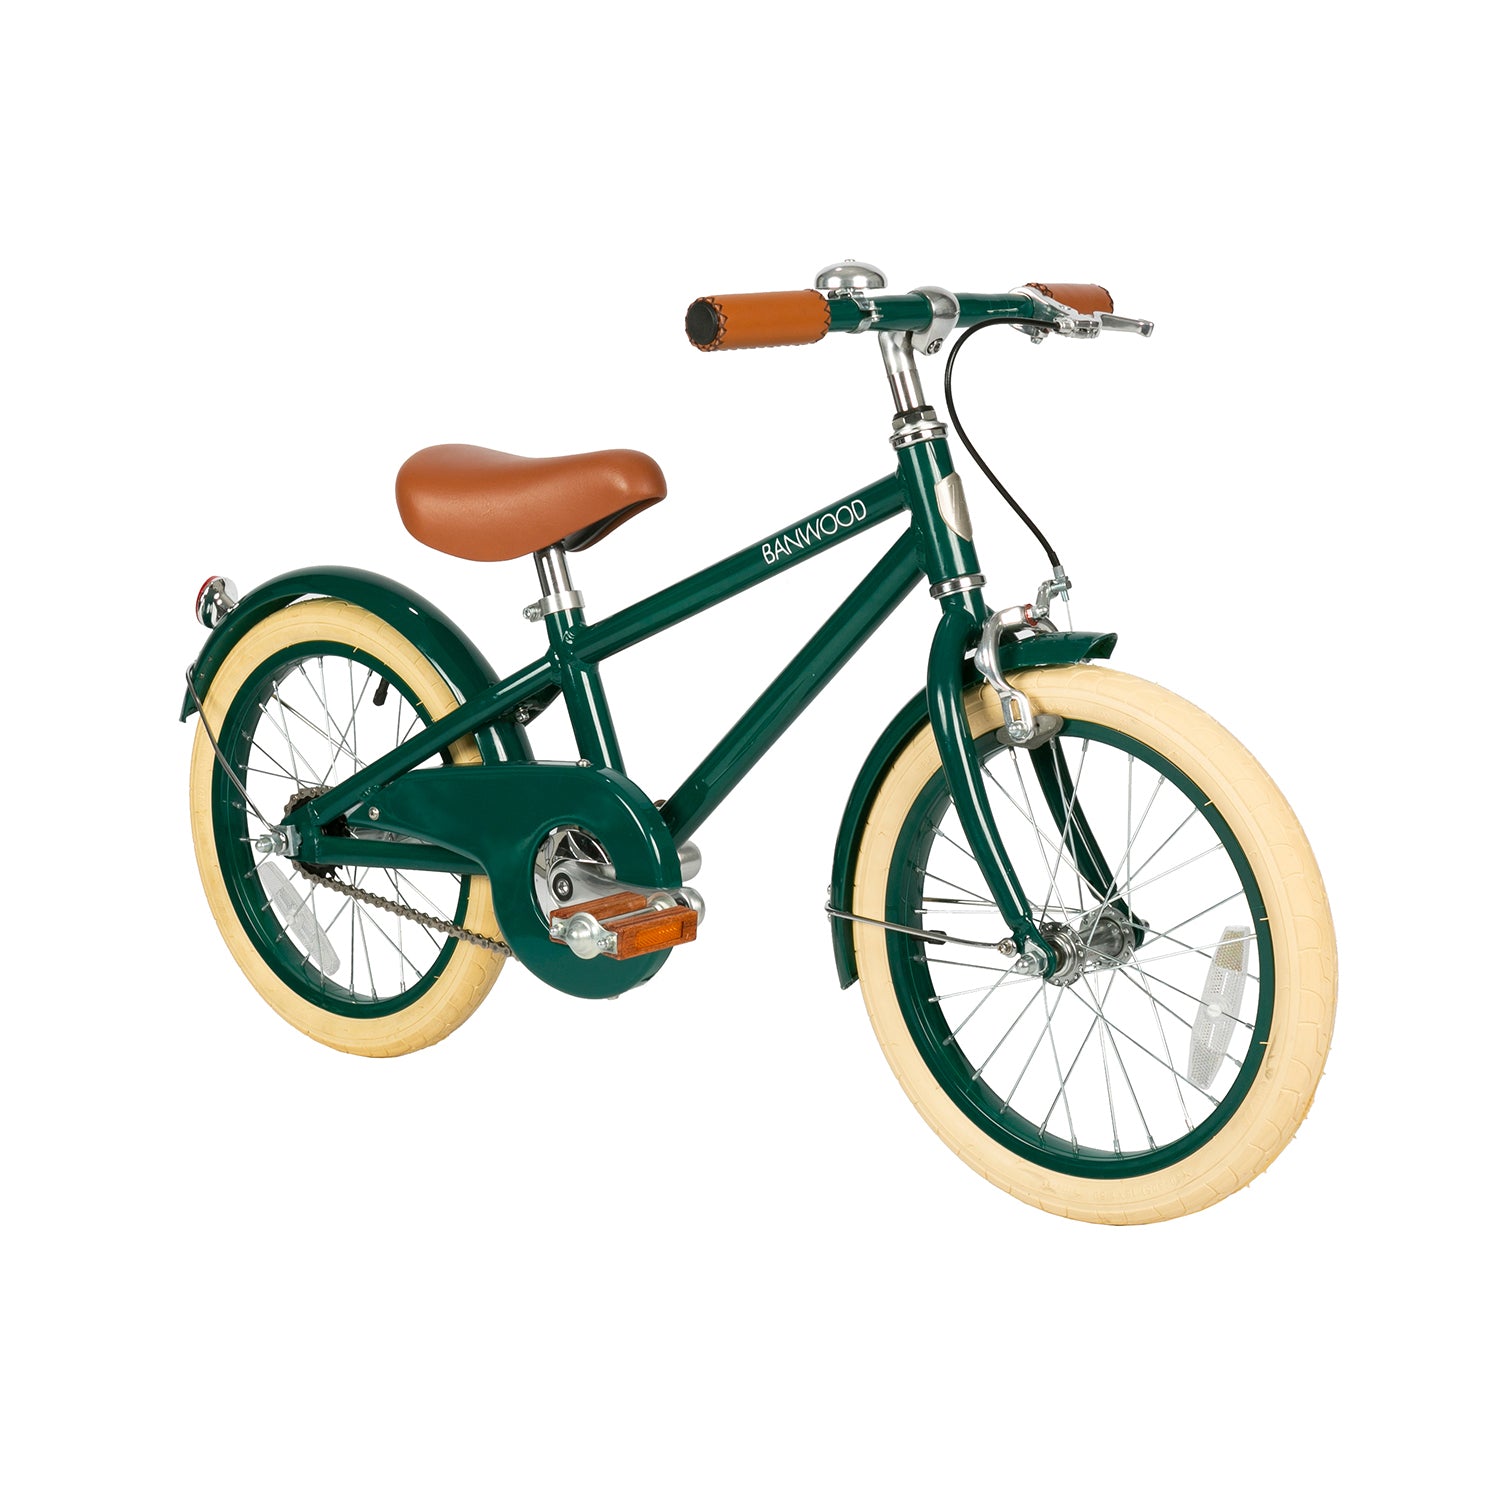 Classic Bicycle - Green